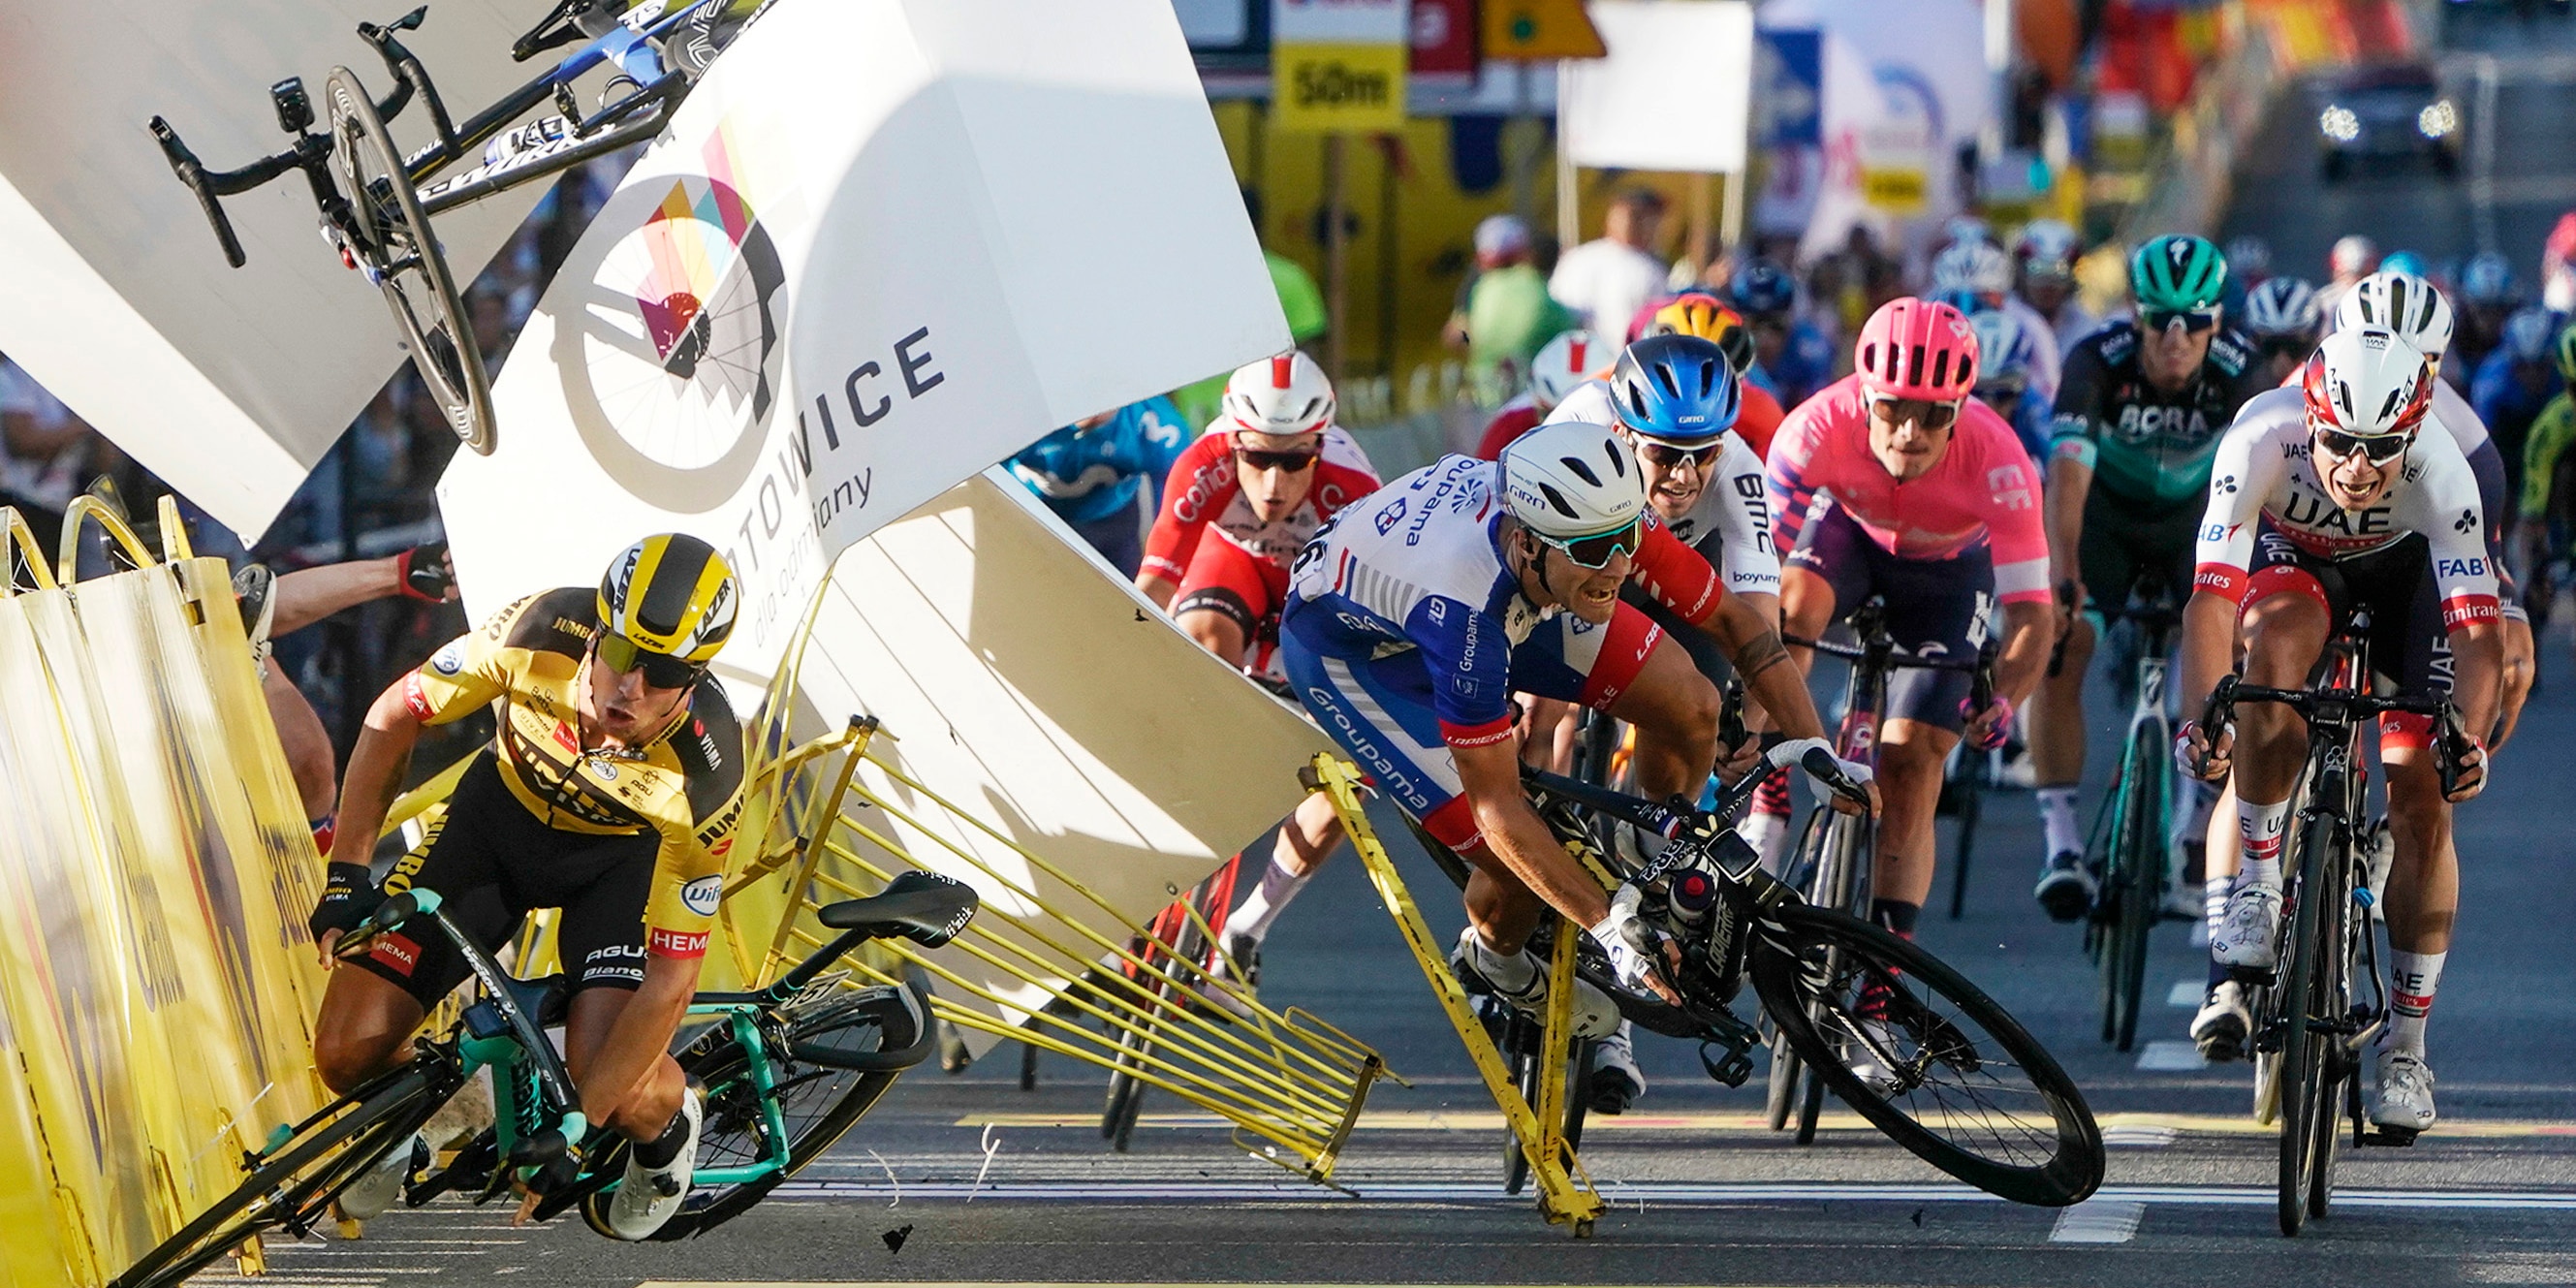 Dutch cyclist Dylan Groenewegen crashes to the ground as a bicycle is flying overhead in a major collision on the final stretch of the opening stage of the Tour de Pologne race in Katowice, Poland, Wednesday, Aug. 5, 2020. The crash began with Groenewegen colliding with another Dutchman sprinting for the win, Fabio Jakobsen, who was hospitalized in serious condition and put into an induced coma. Jakobsen was declared the winner of the opening stage and Groenewegen was disqualified. (AP Photo/Tomasz Markowski)